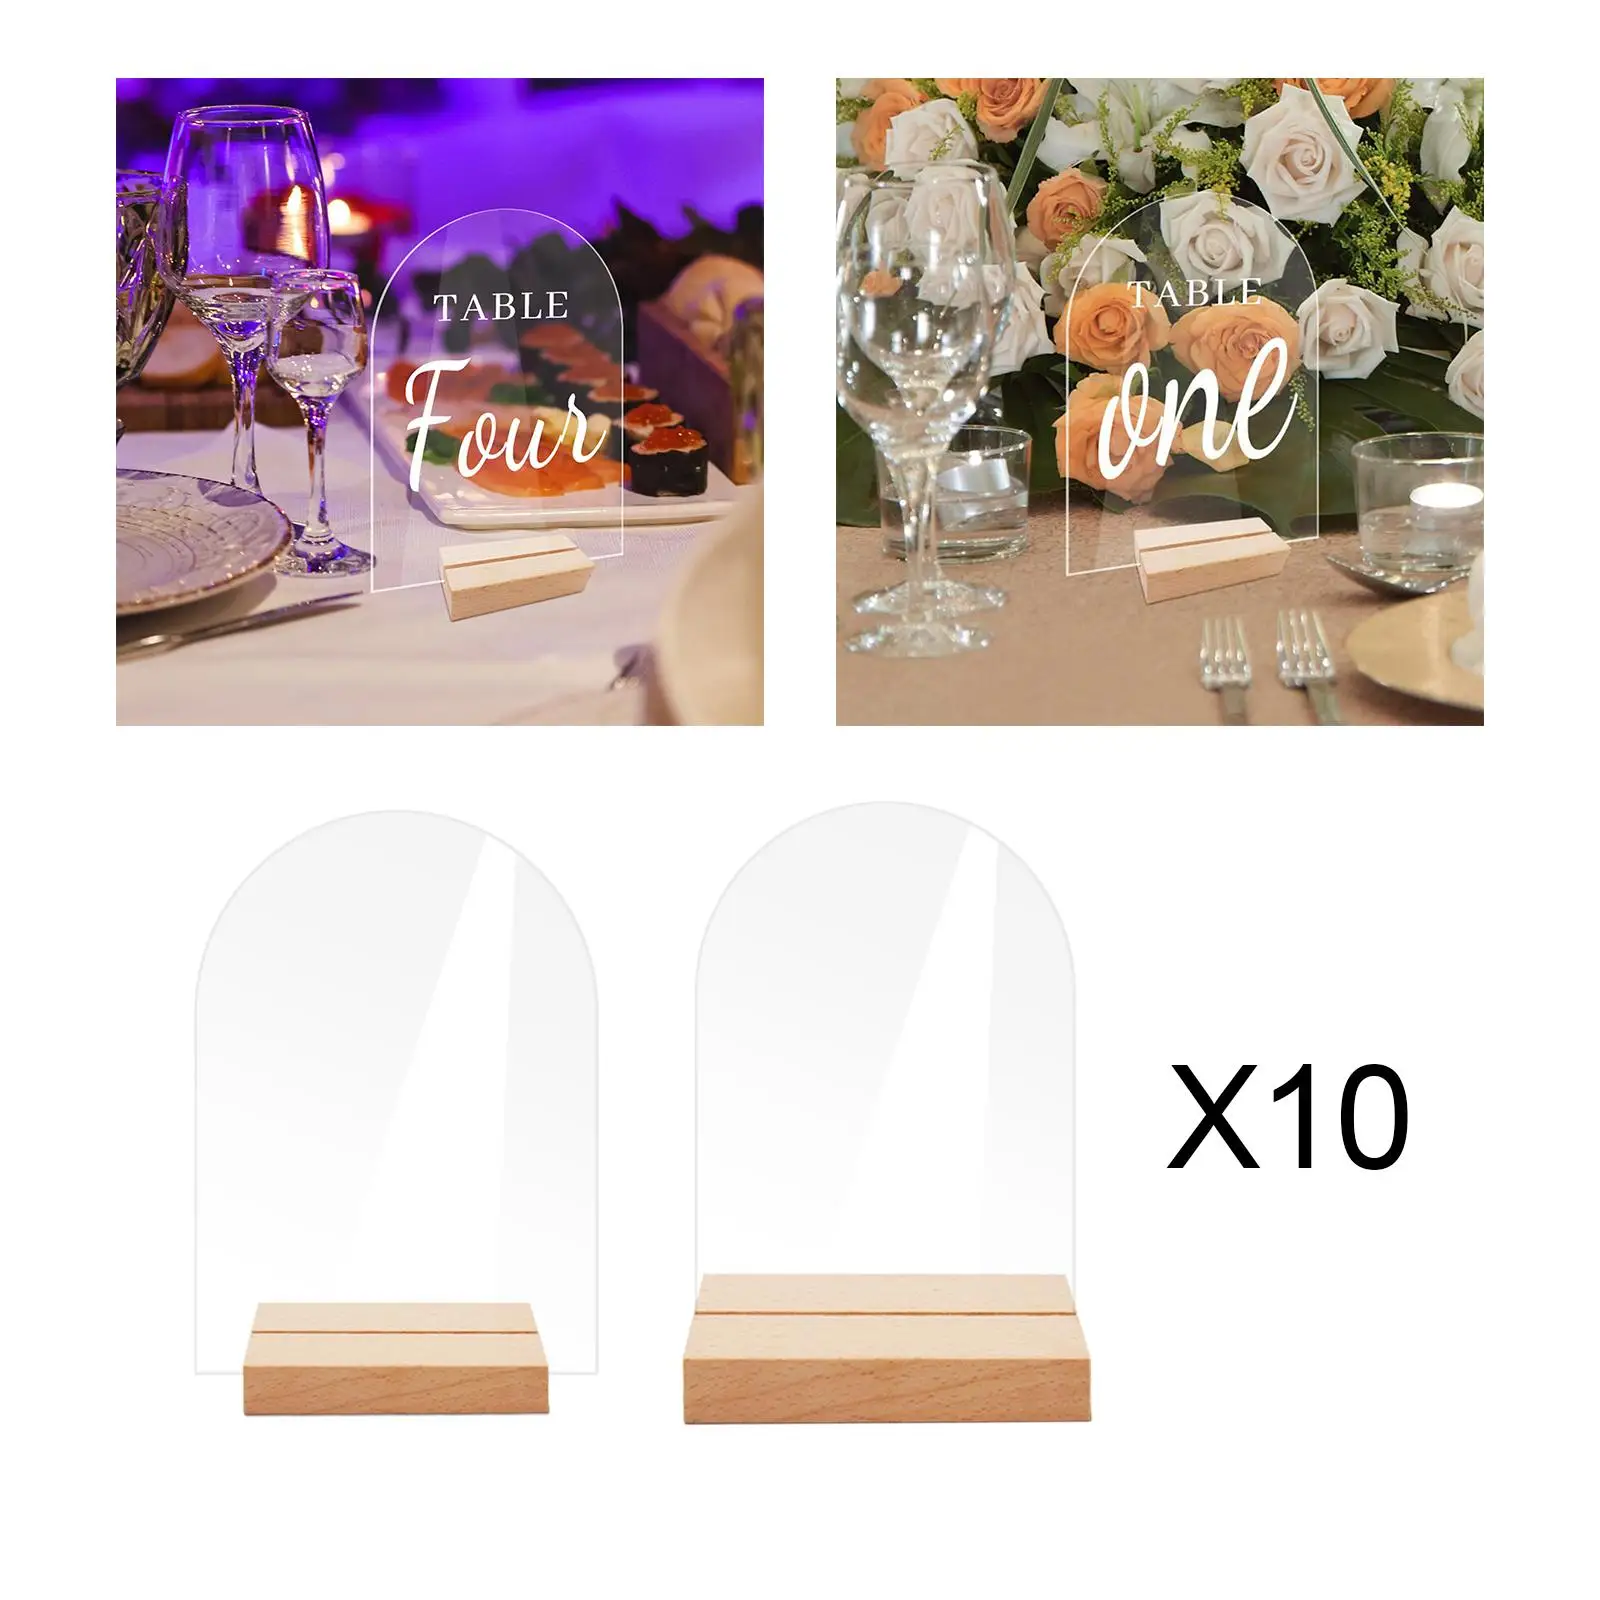 10Pcs Clear Acrylic Place Cards Guest Name Signs Cards Seating Cards DIY Table Numbers for Wedding Party Dinner Birthday Decor